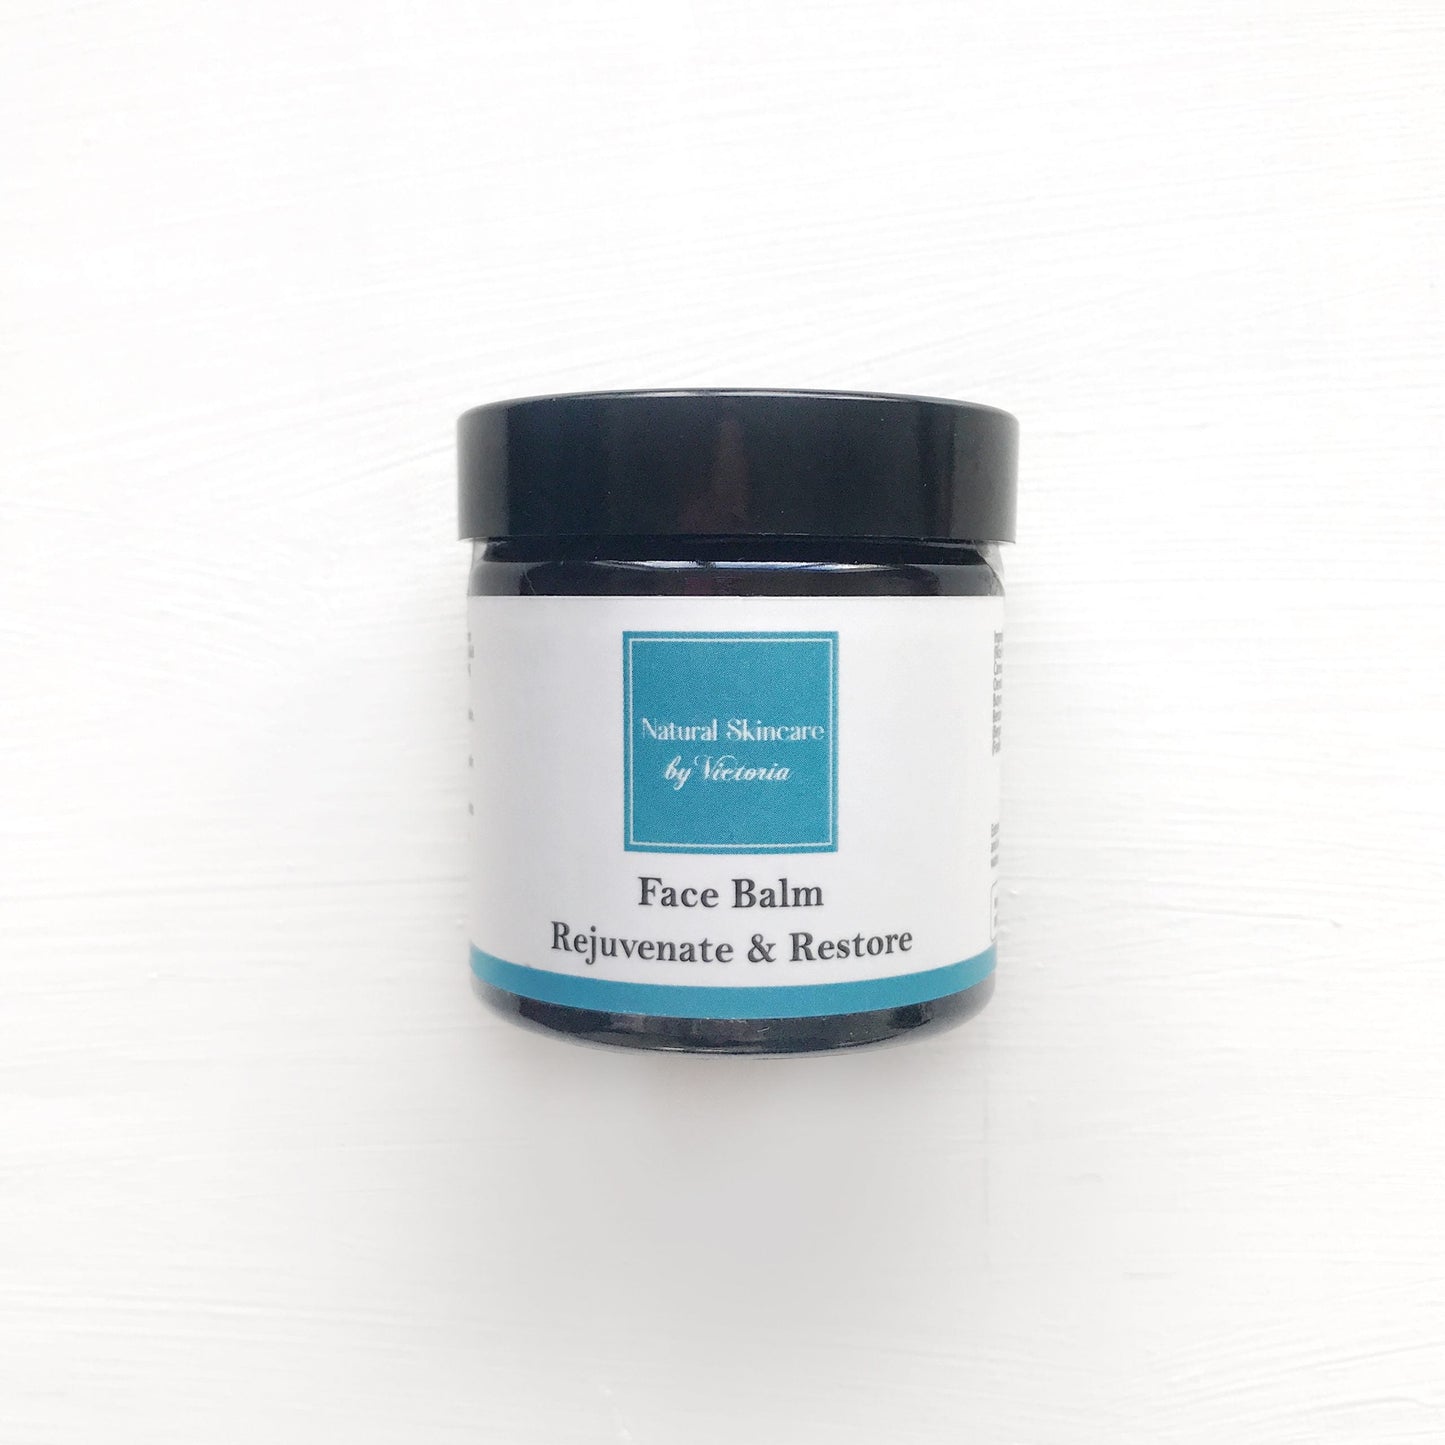 Face Balm - Eco-friendly and enriching skincare, designed for sustainable and radiant results.